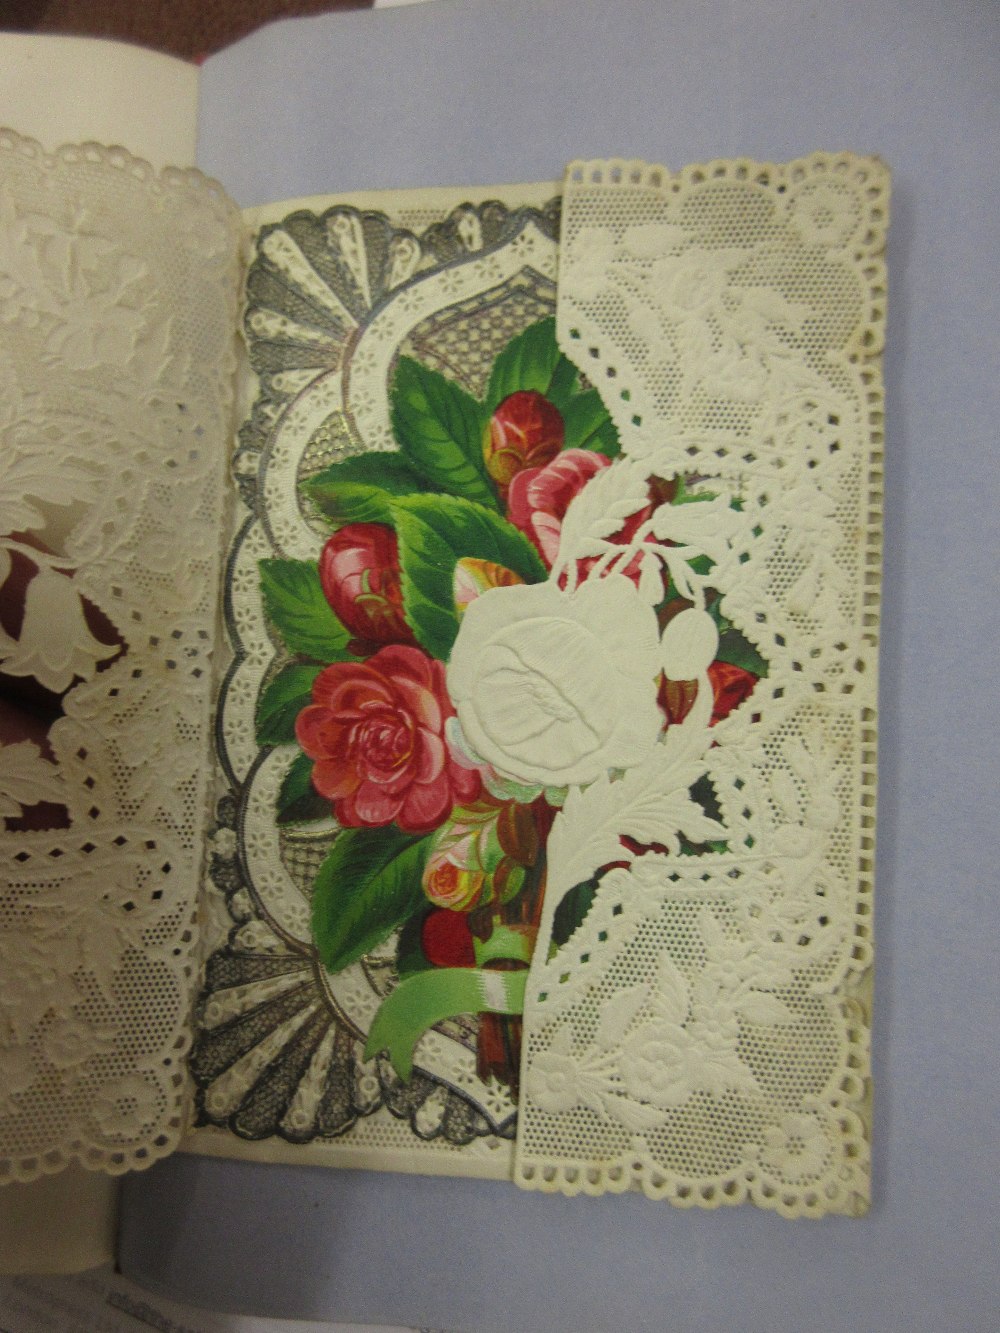 Small red cloth bound album containing a collection of valentines, love tokens, manuscript - Image 11 of 14